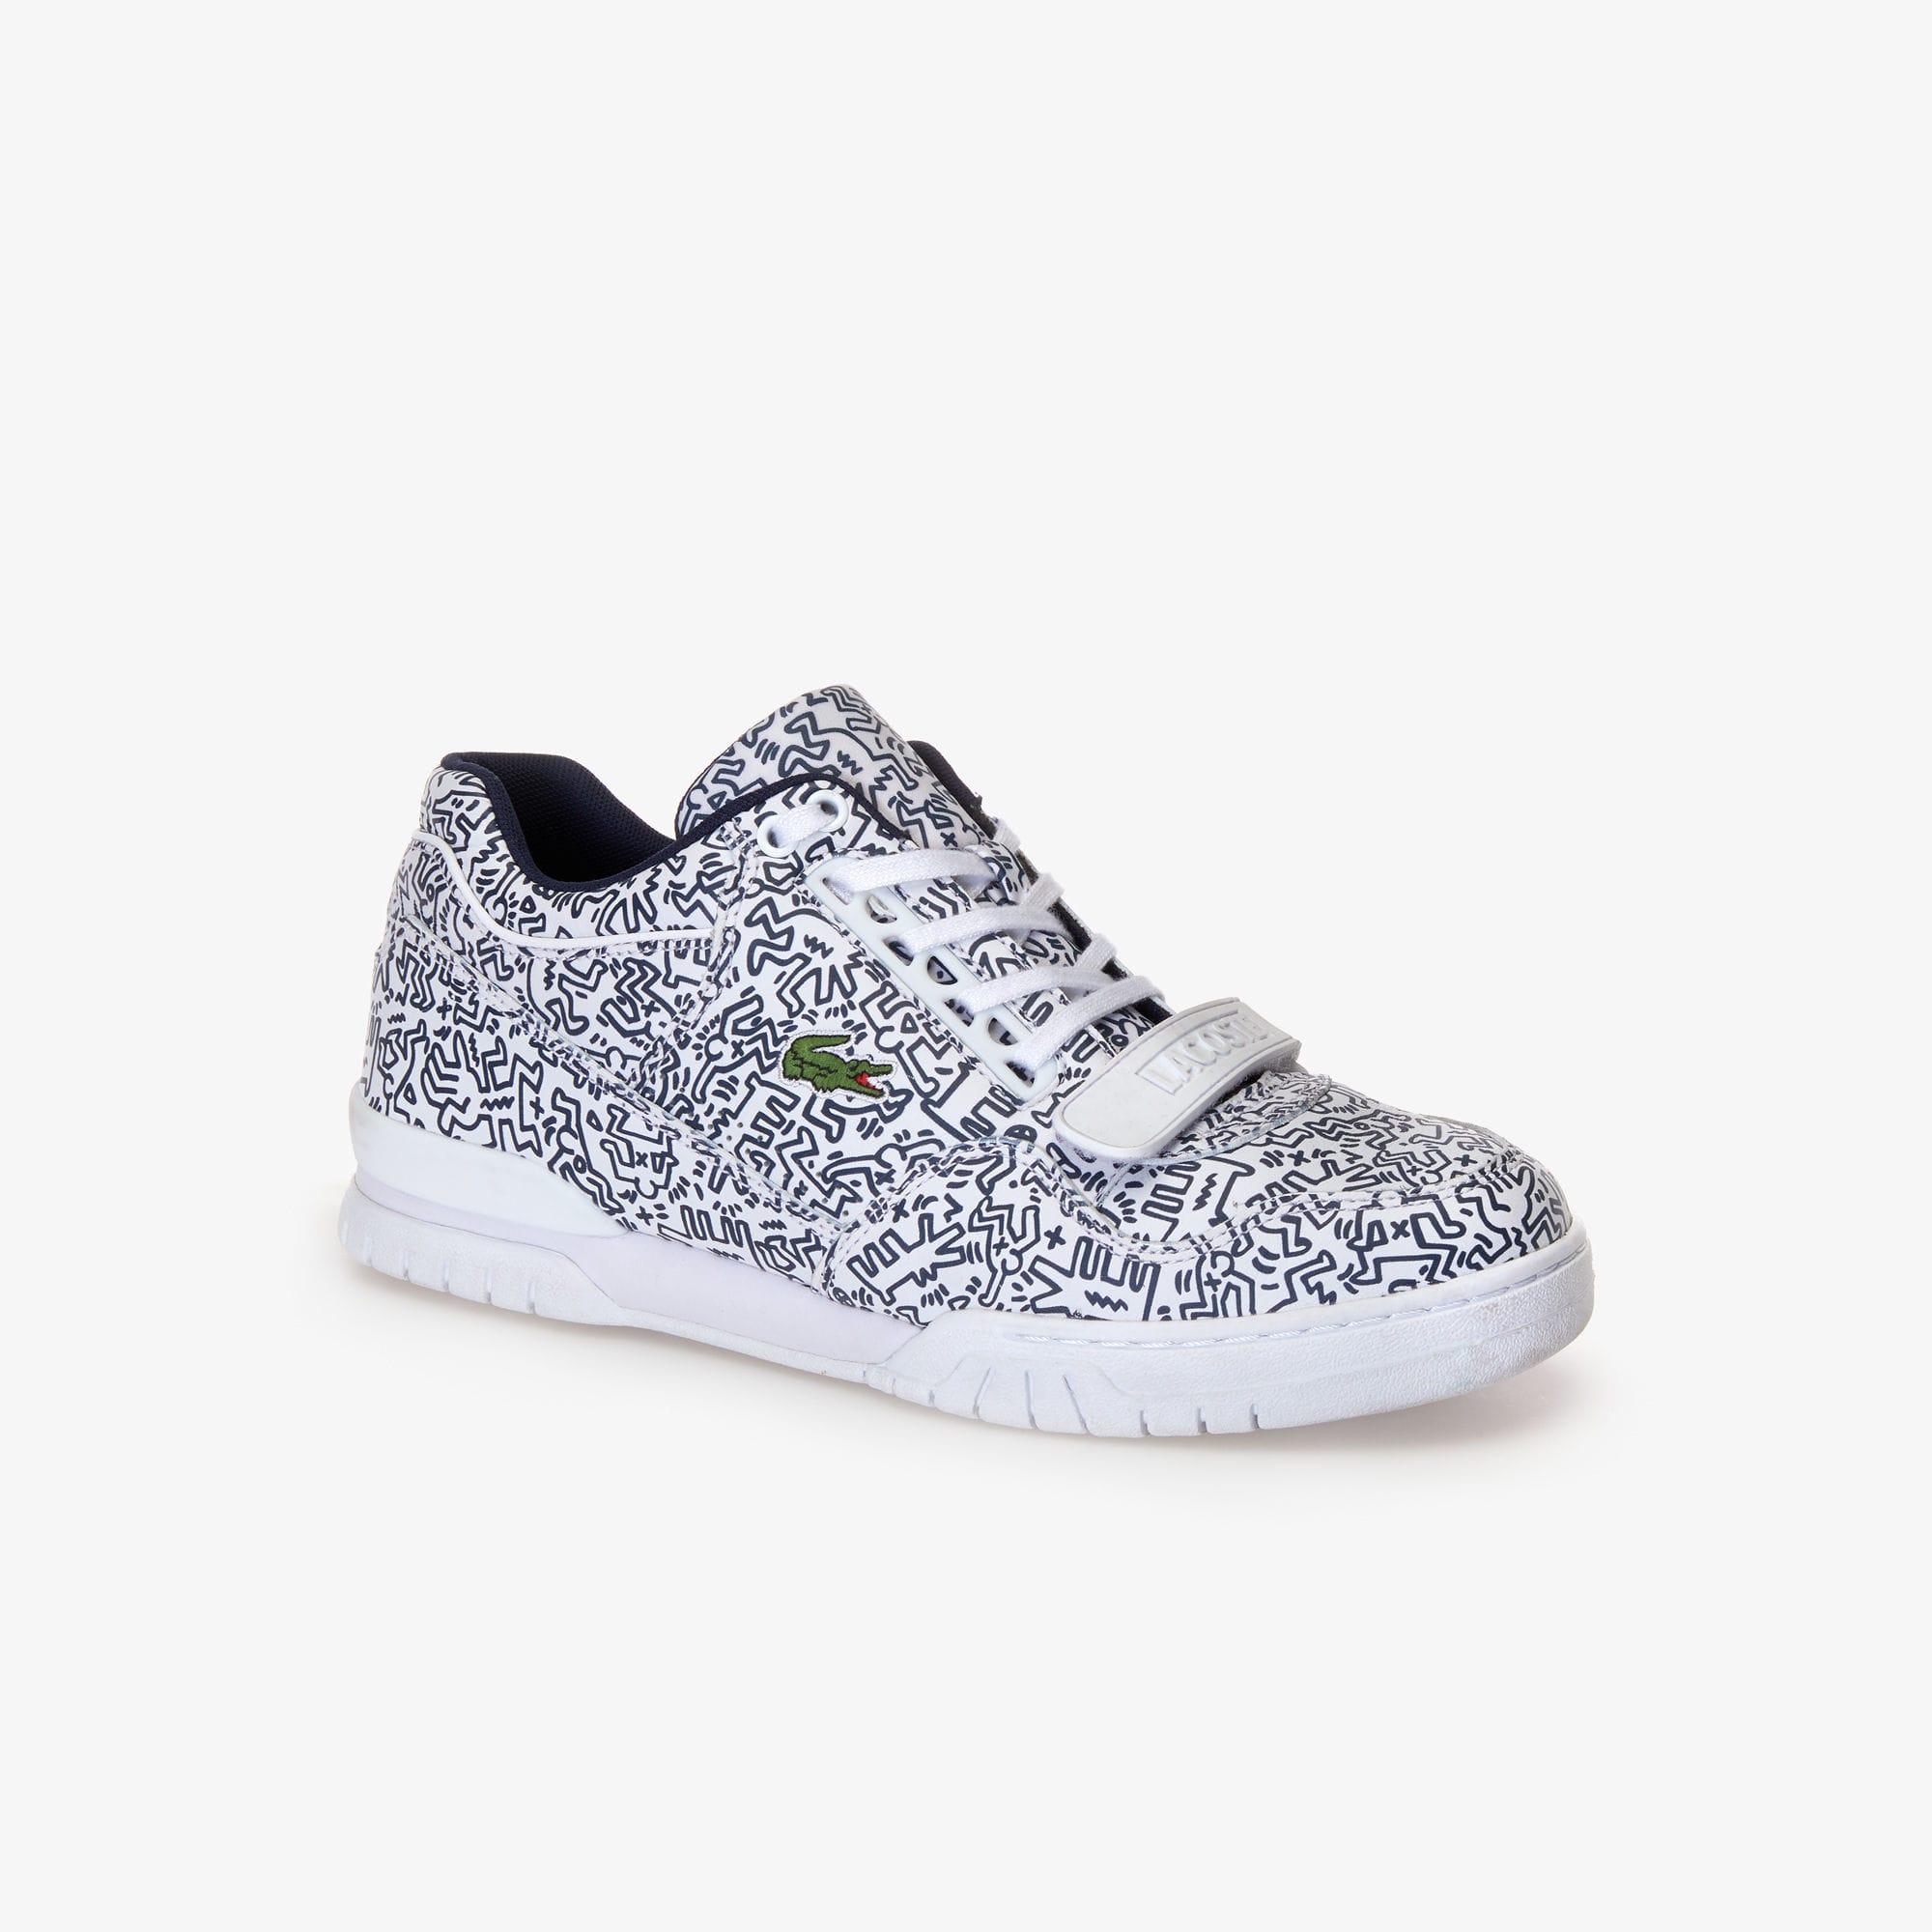 lacoste keith haring sneakers